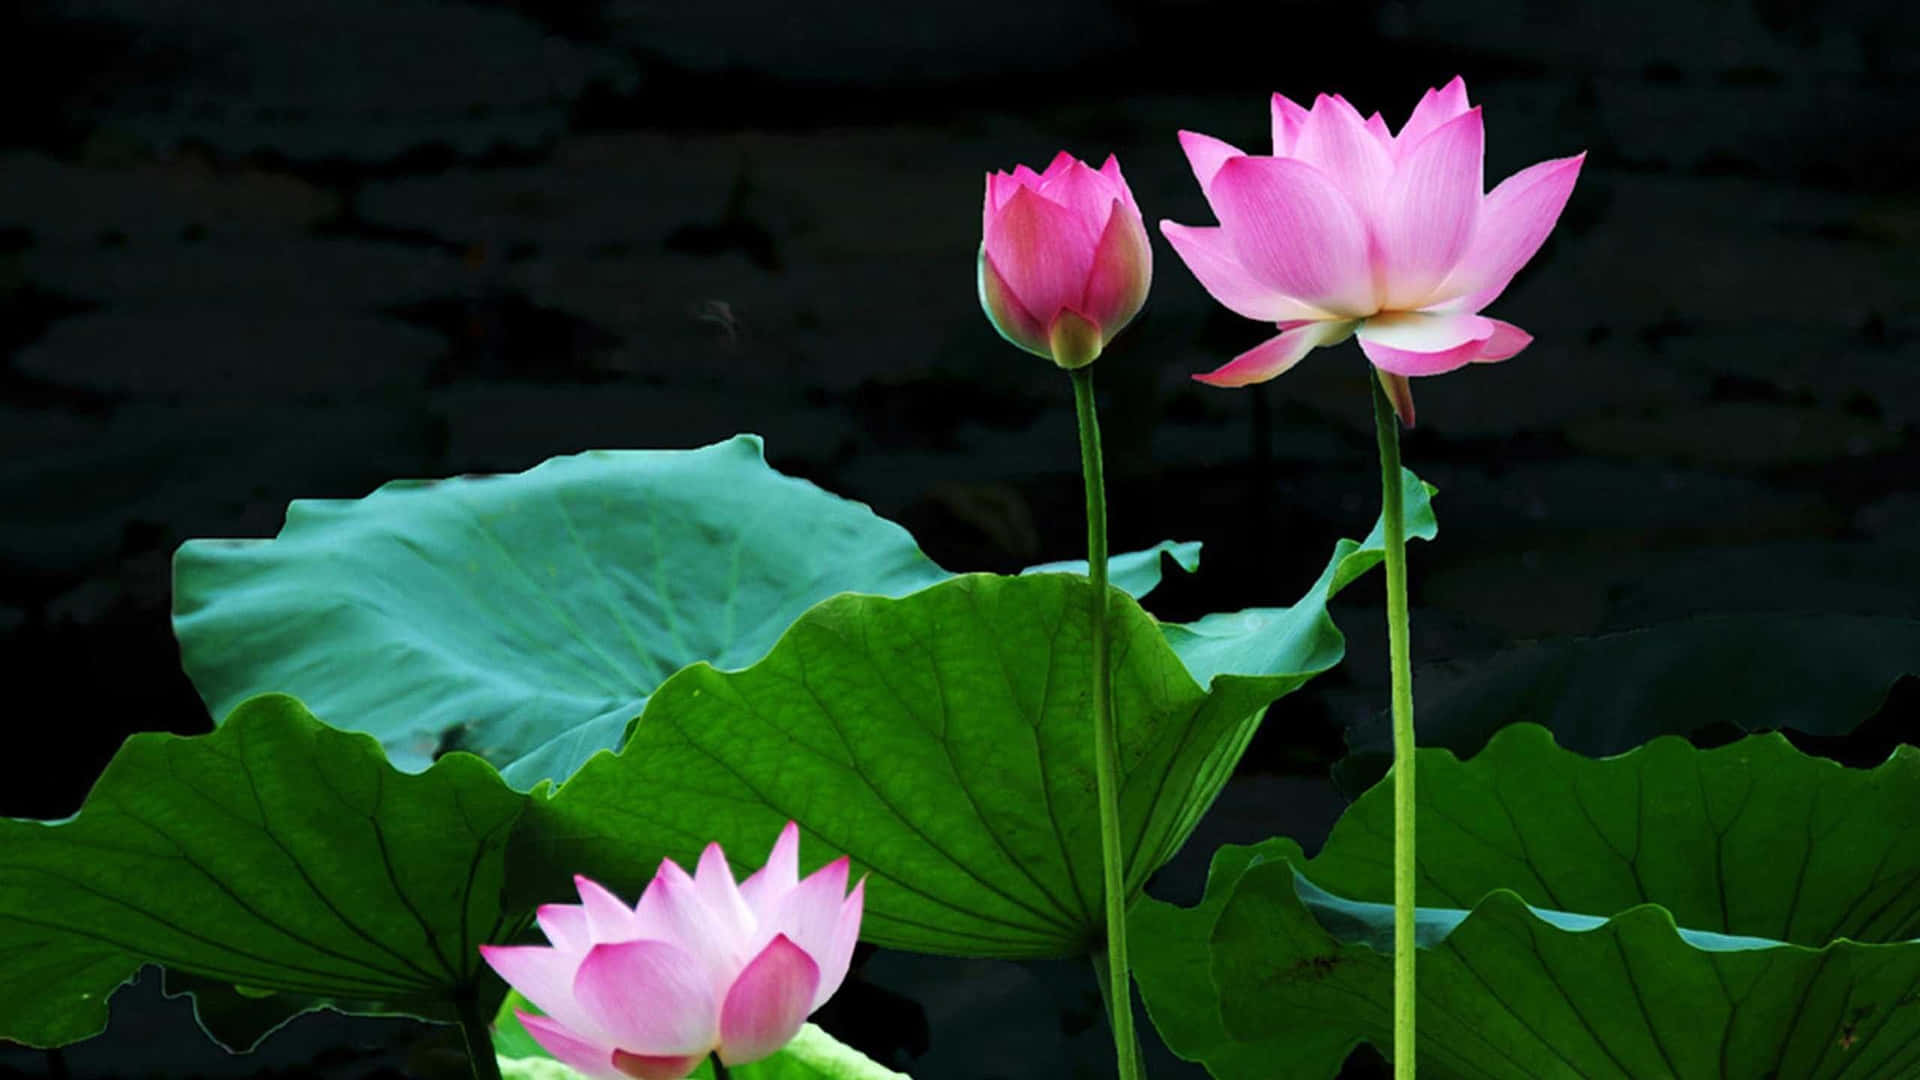 Enjoy the beauty of a vibrant pink lotus flower in full bloom.